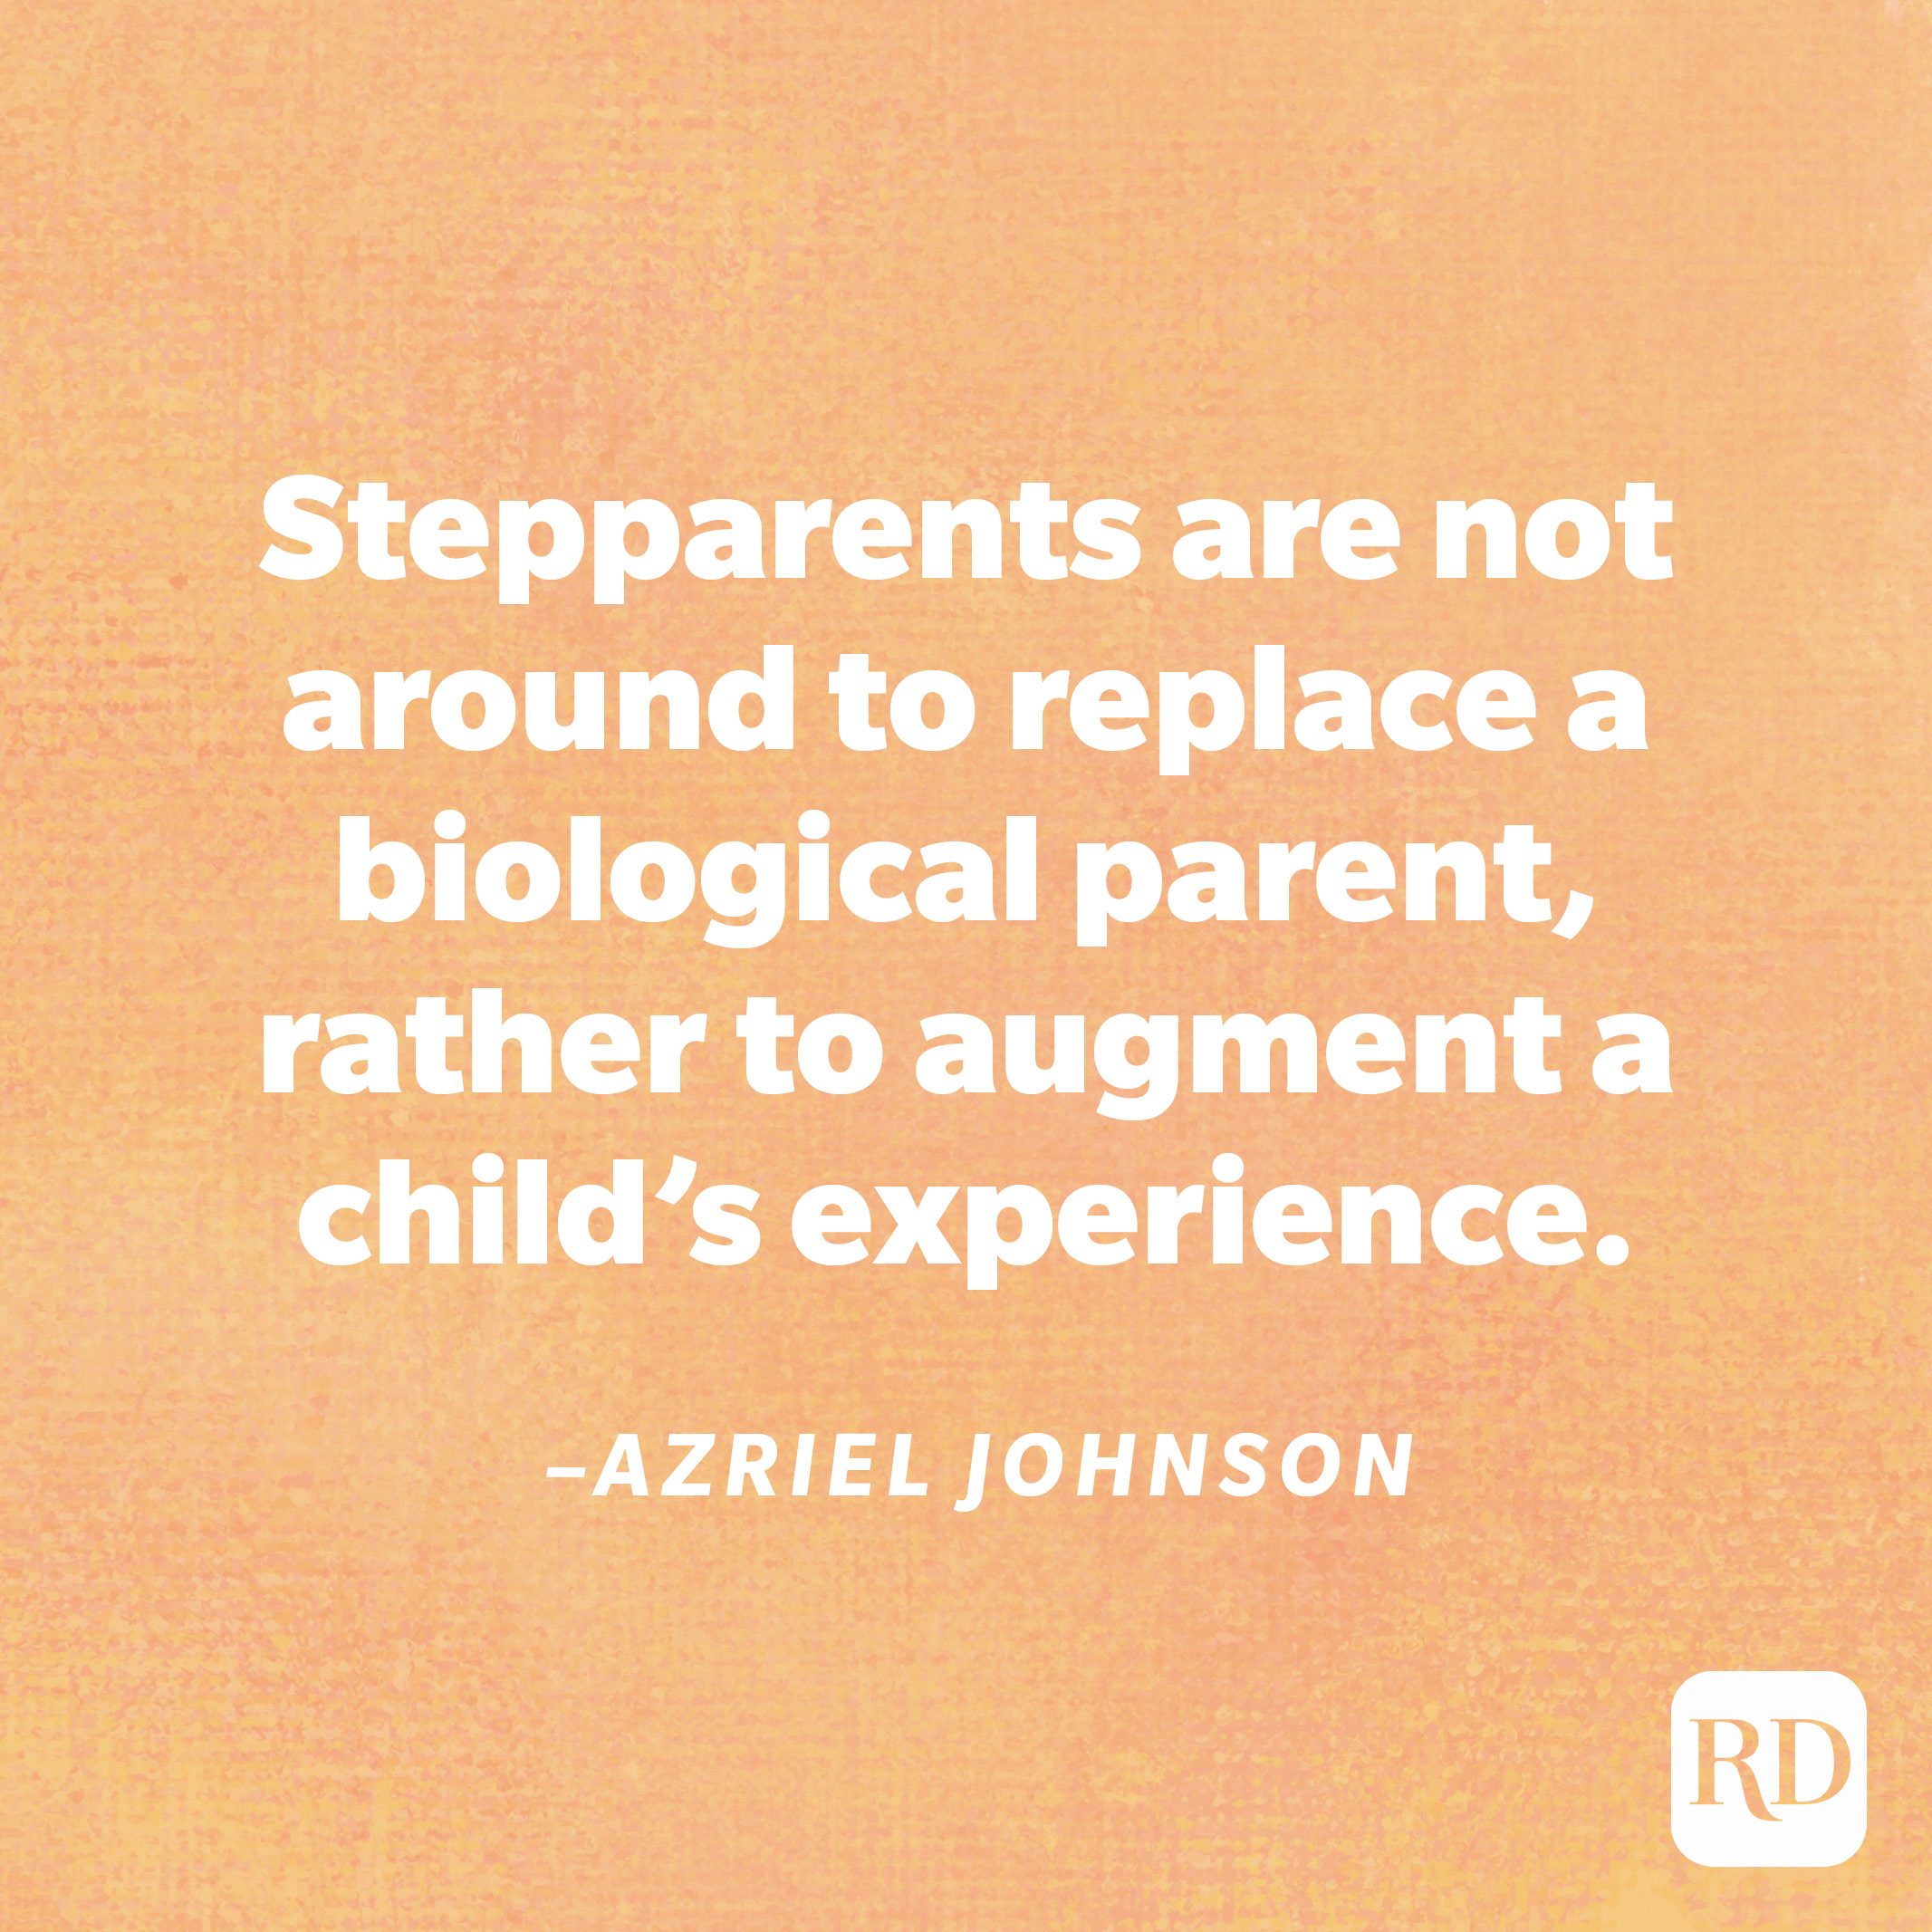 "Stepparents are not around to replace a biological parent, rather to augment a child’s experience."—Azriel Johnson